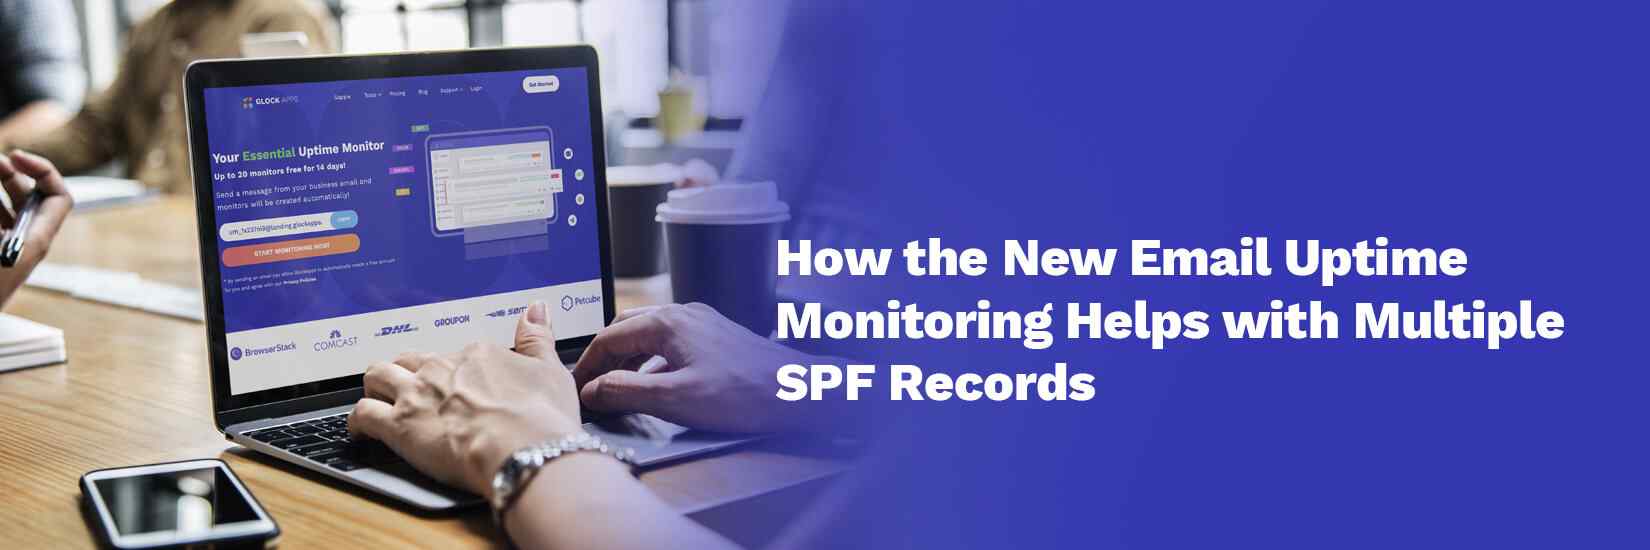 How the New Email Uptime Monitoring Helps with Multiple SPF Records